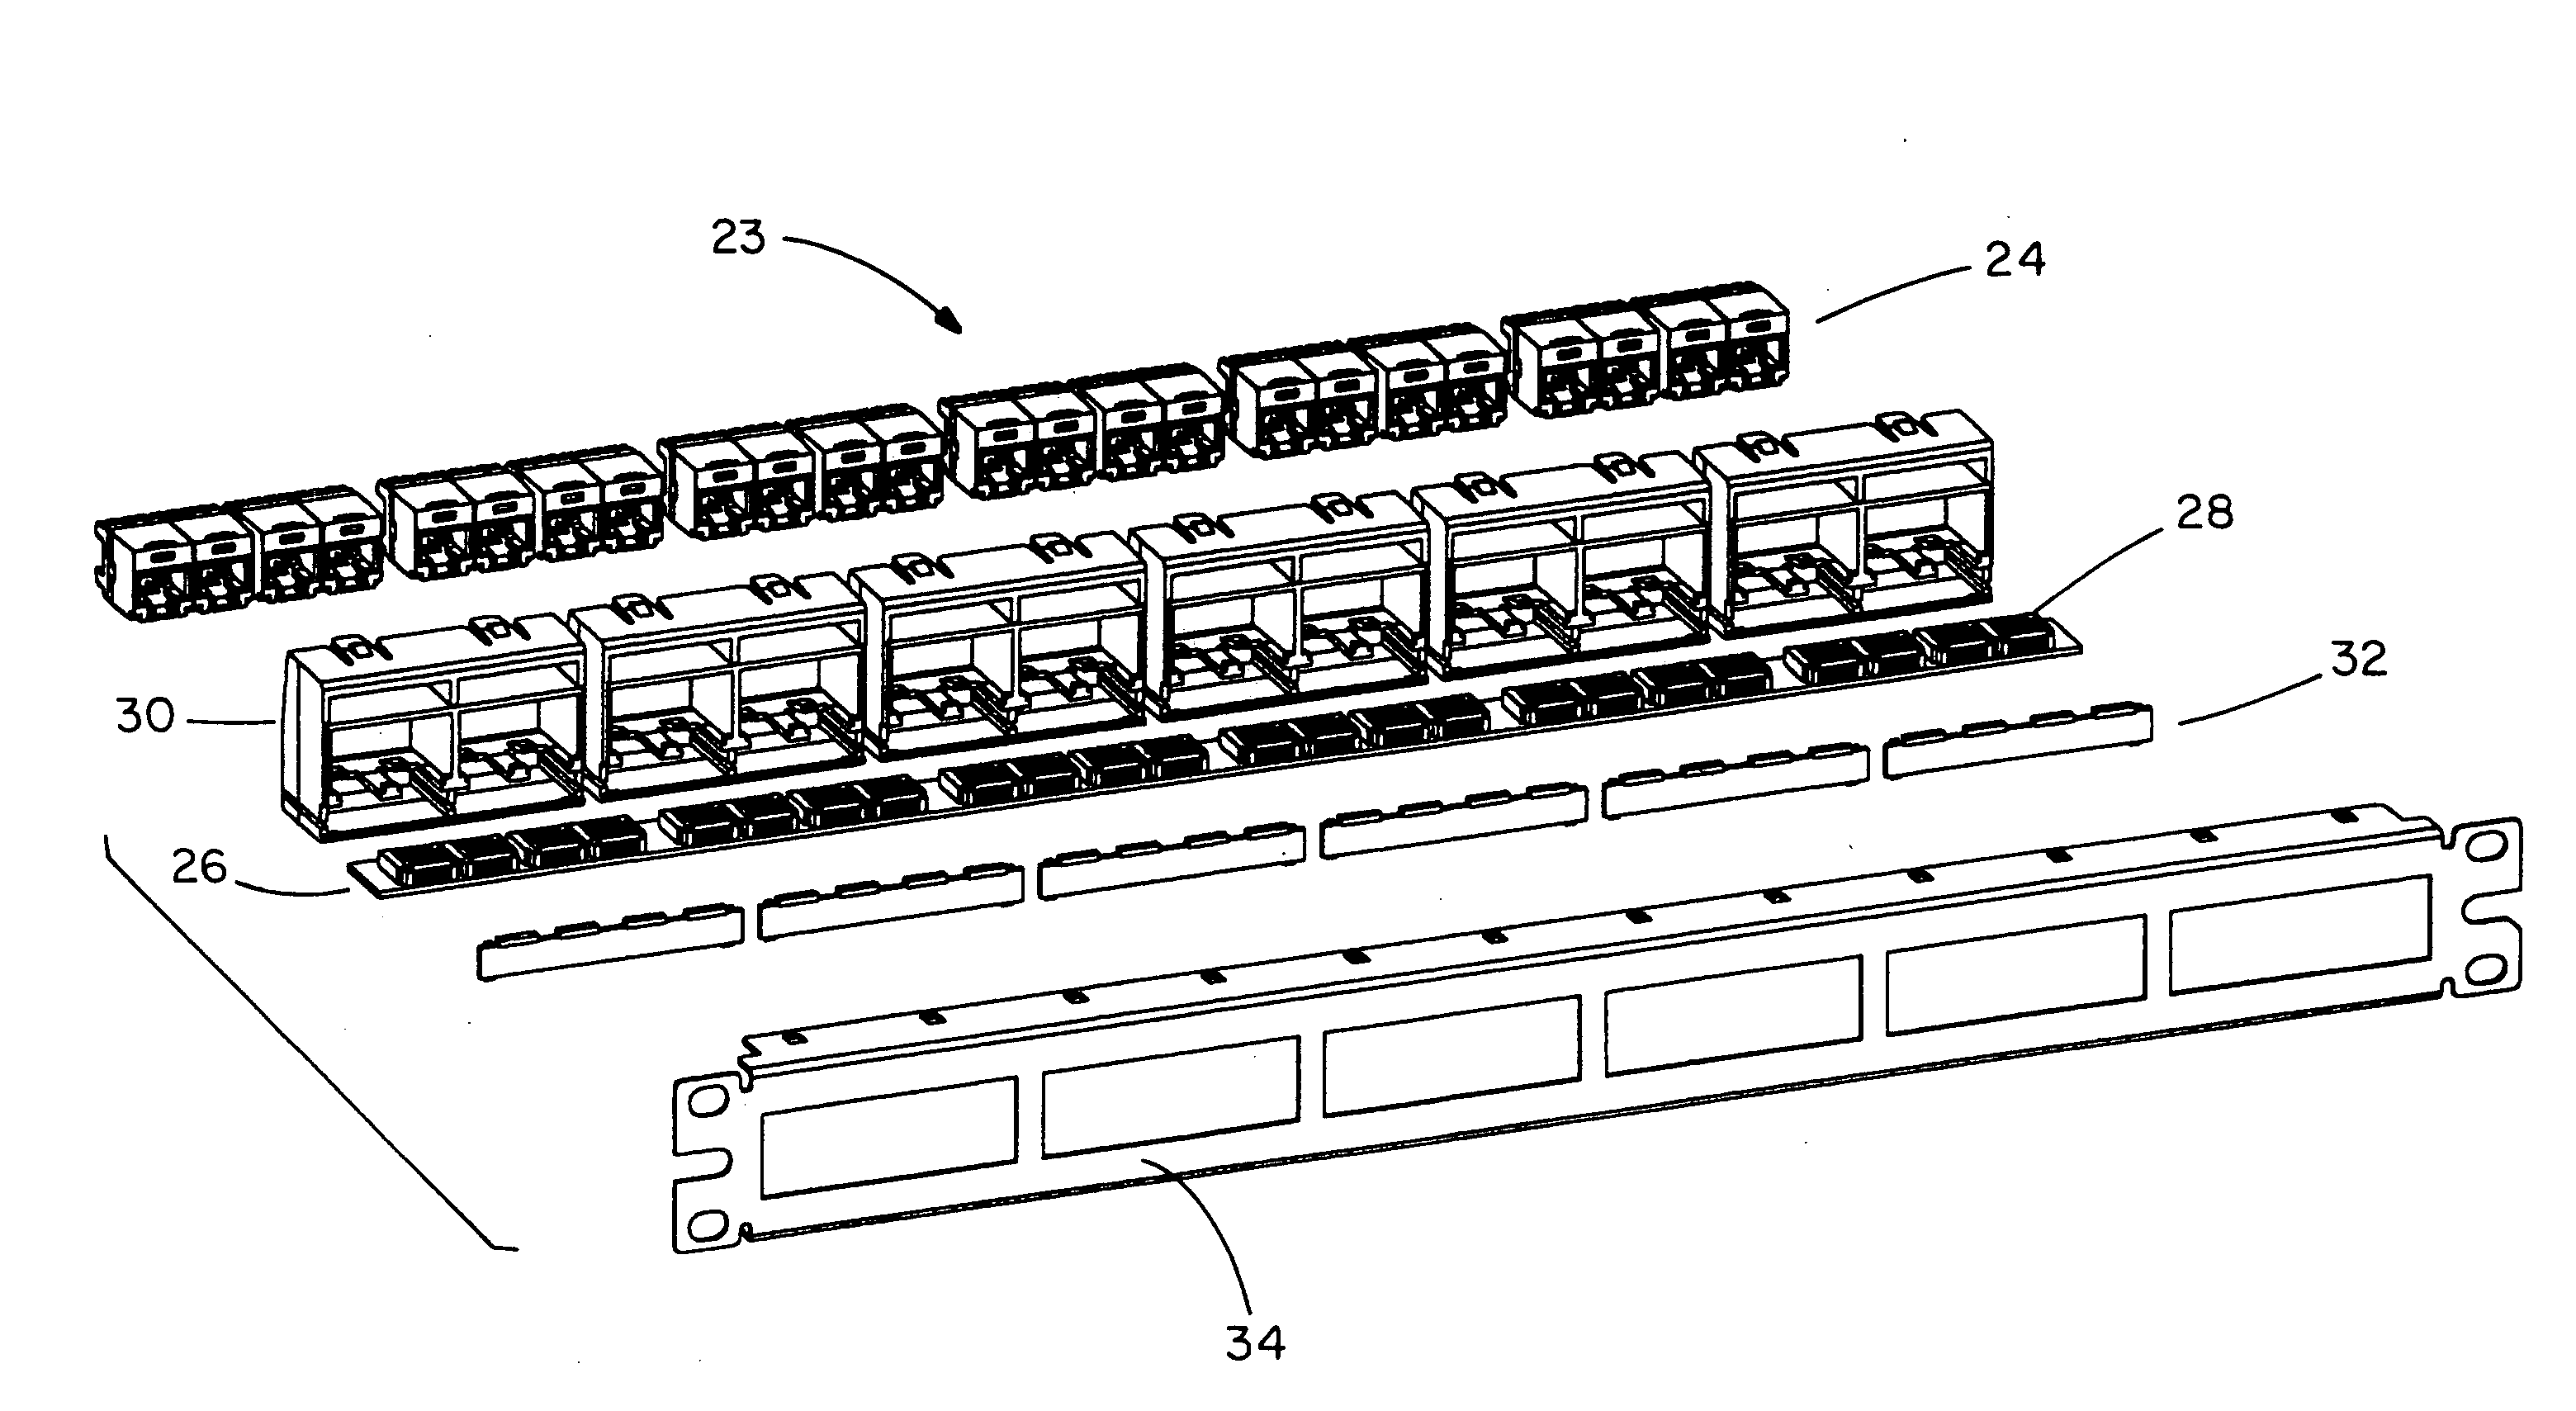 Communications patch panel systems and methods